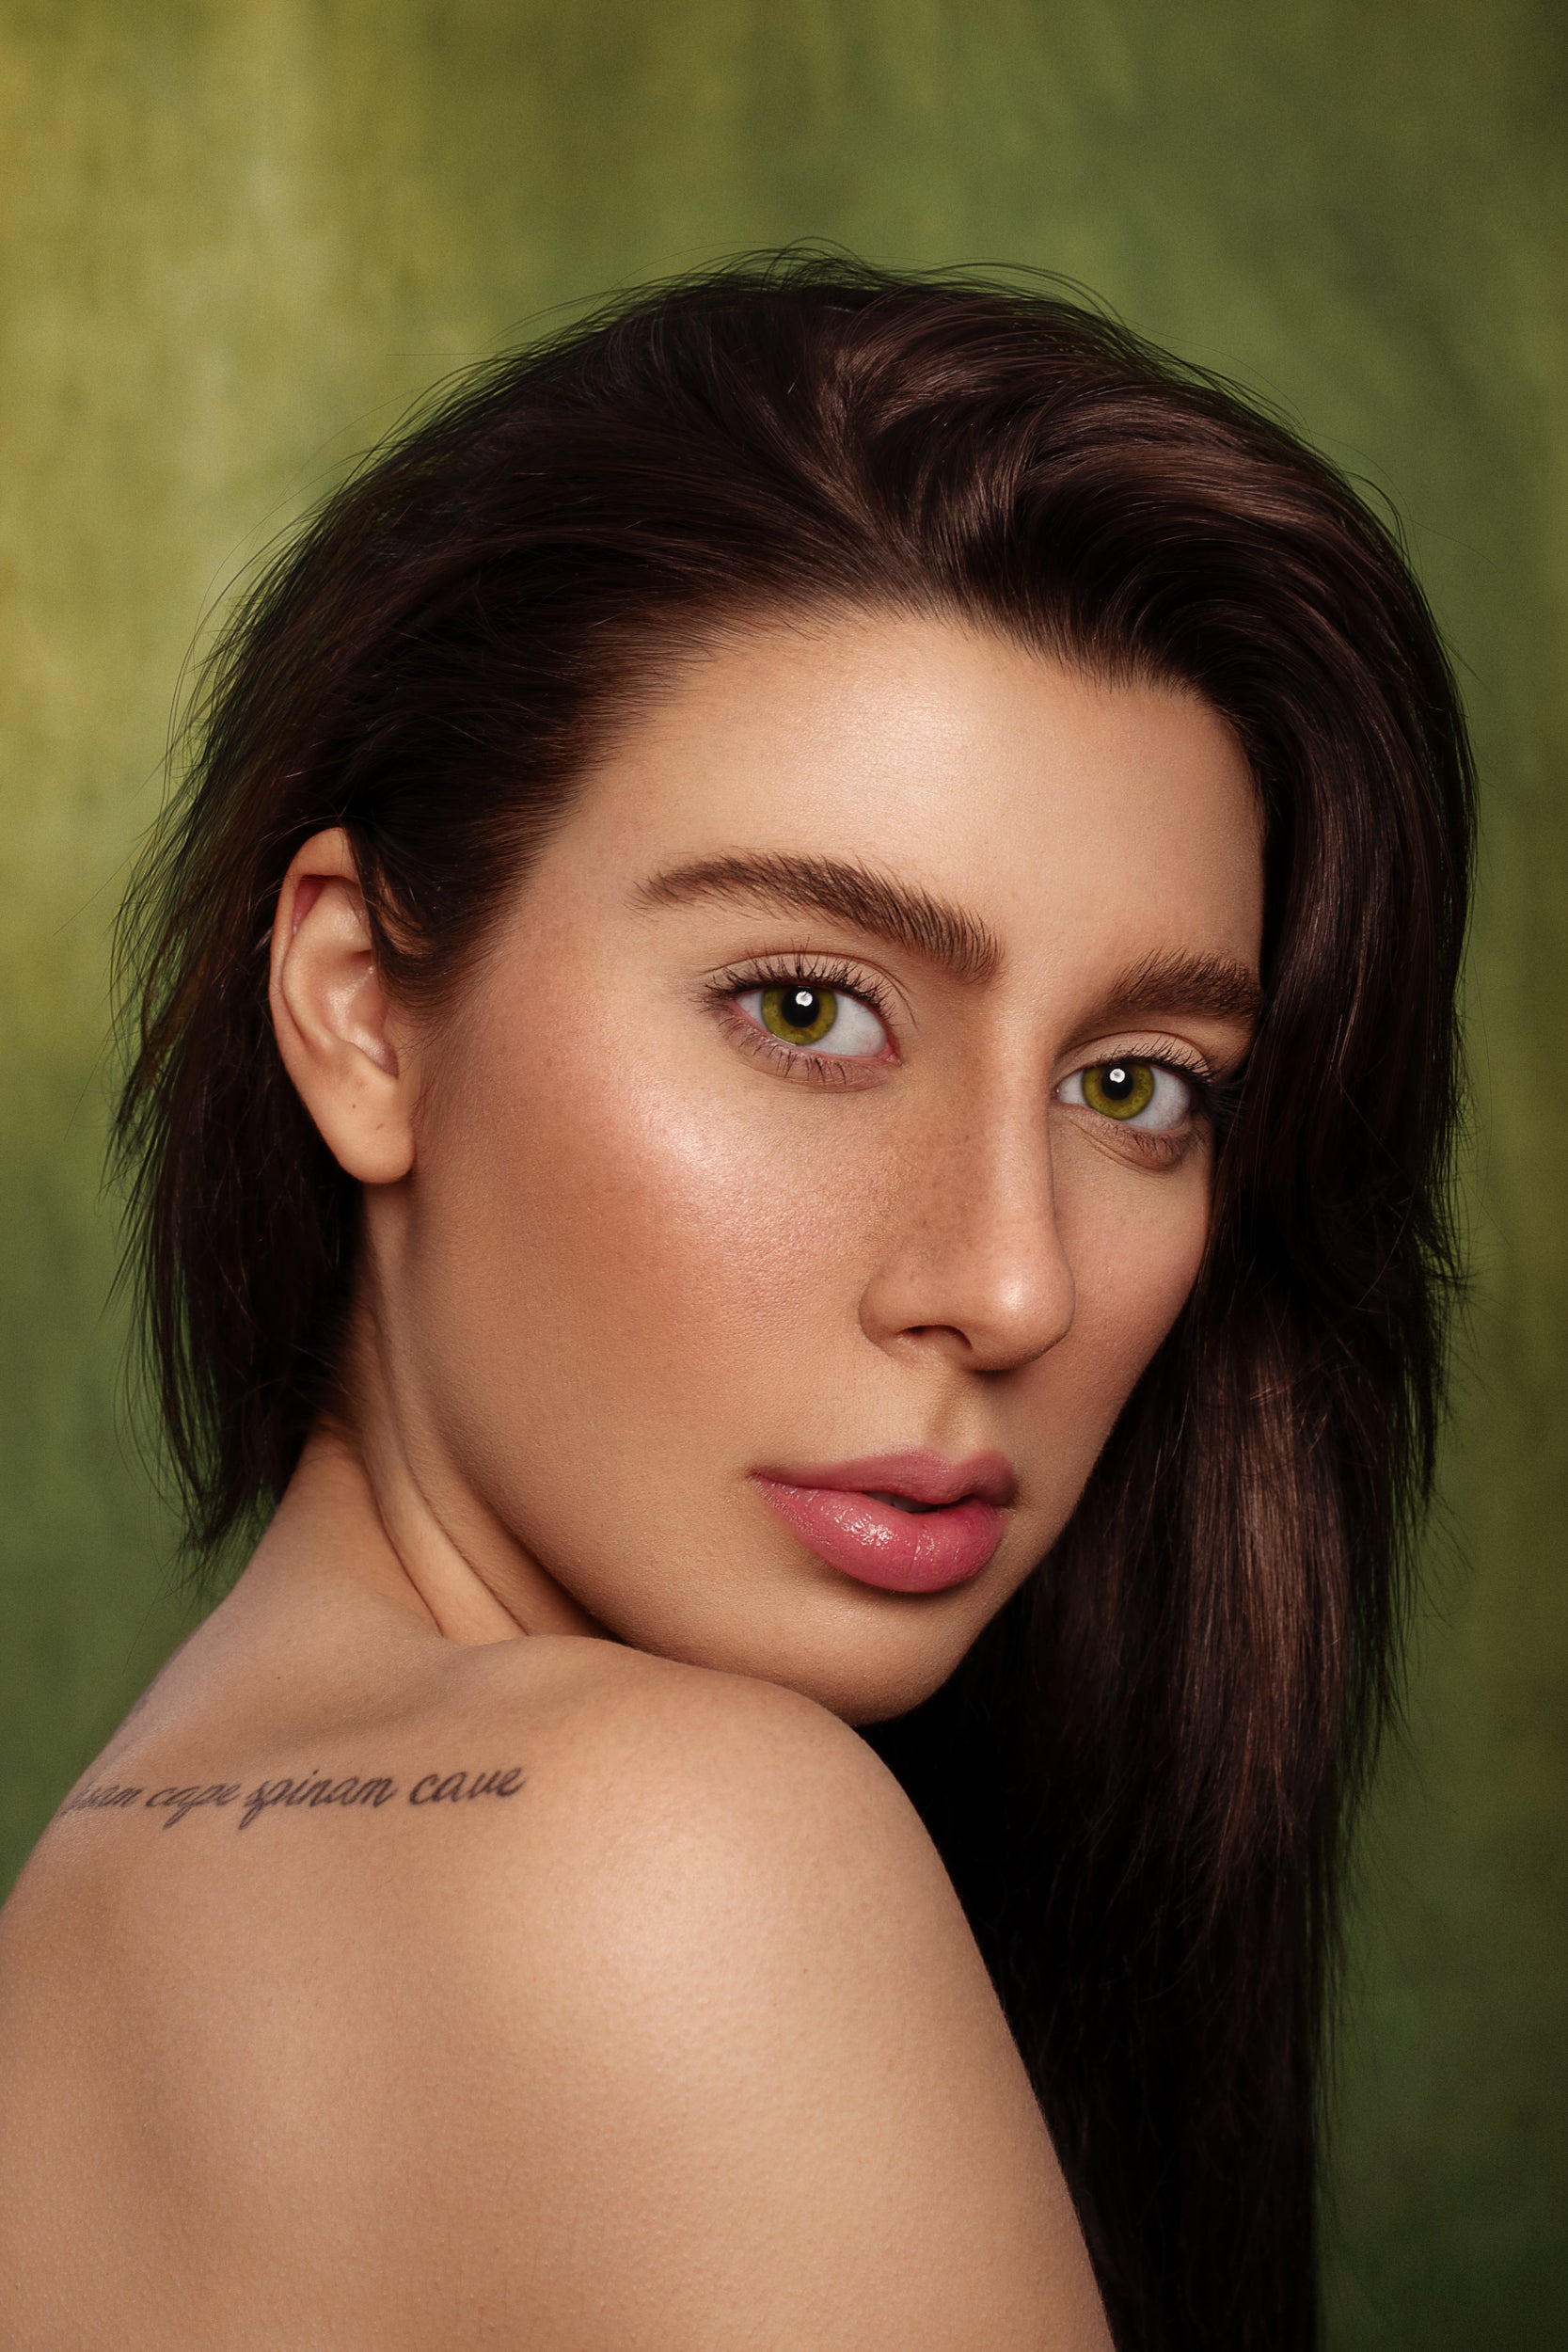 Portrait of a woman with long dark hair and green eyes, looking over her shoulder against a Kate Sweep Green Abstract Backdrop for Photography. She has subtle makeup and a visible tattoo on her shoulder.